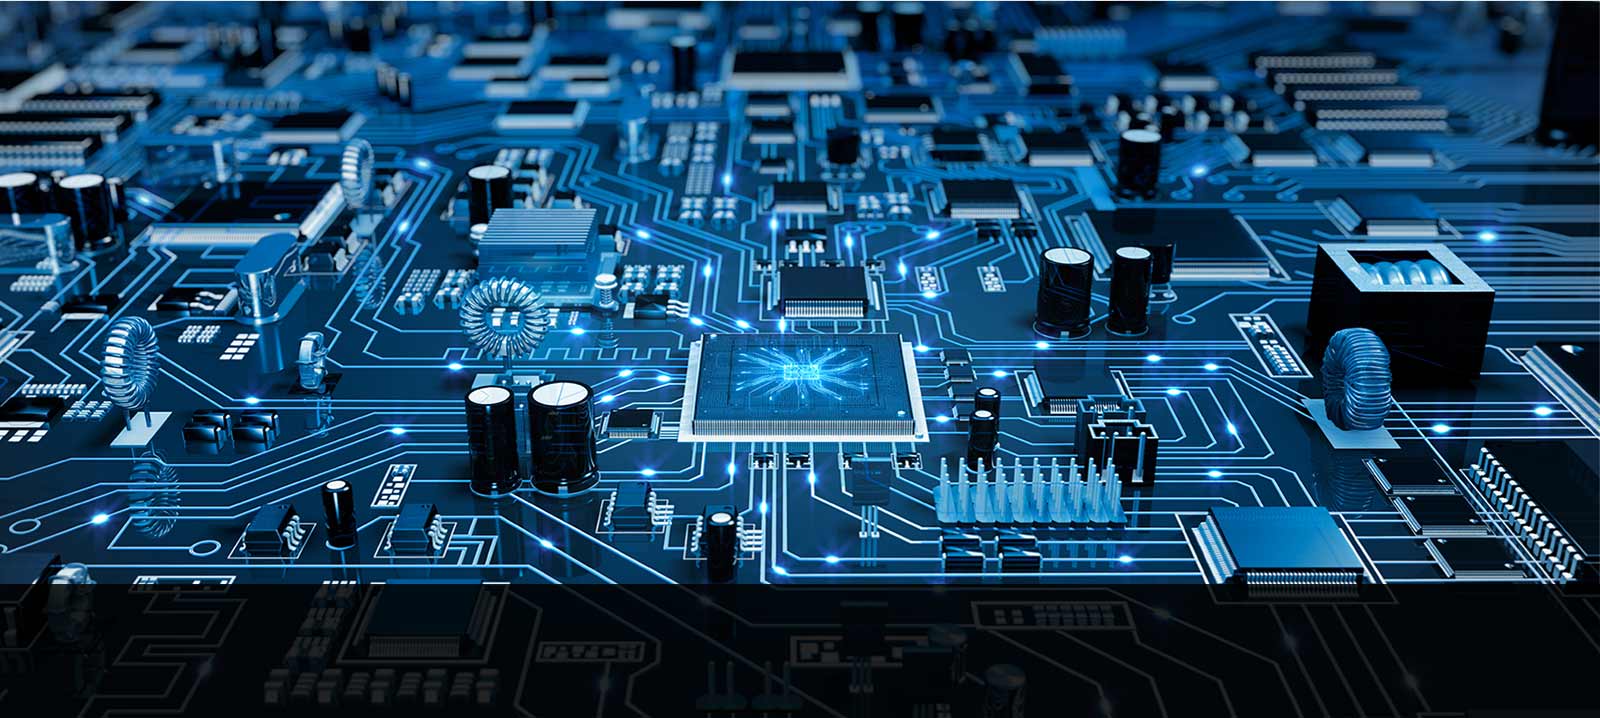 RW_8582] Circuit Board Computers Hardware Cyber Wallpapers Download Diagram